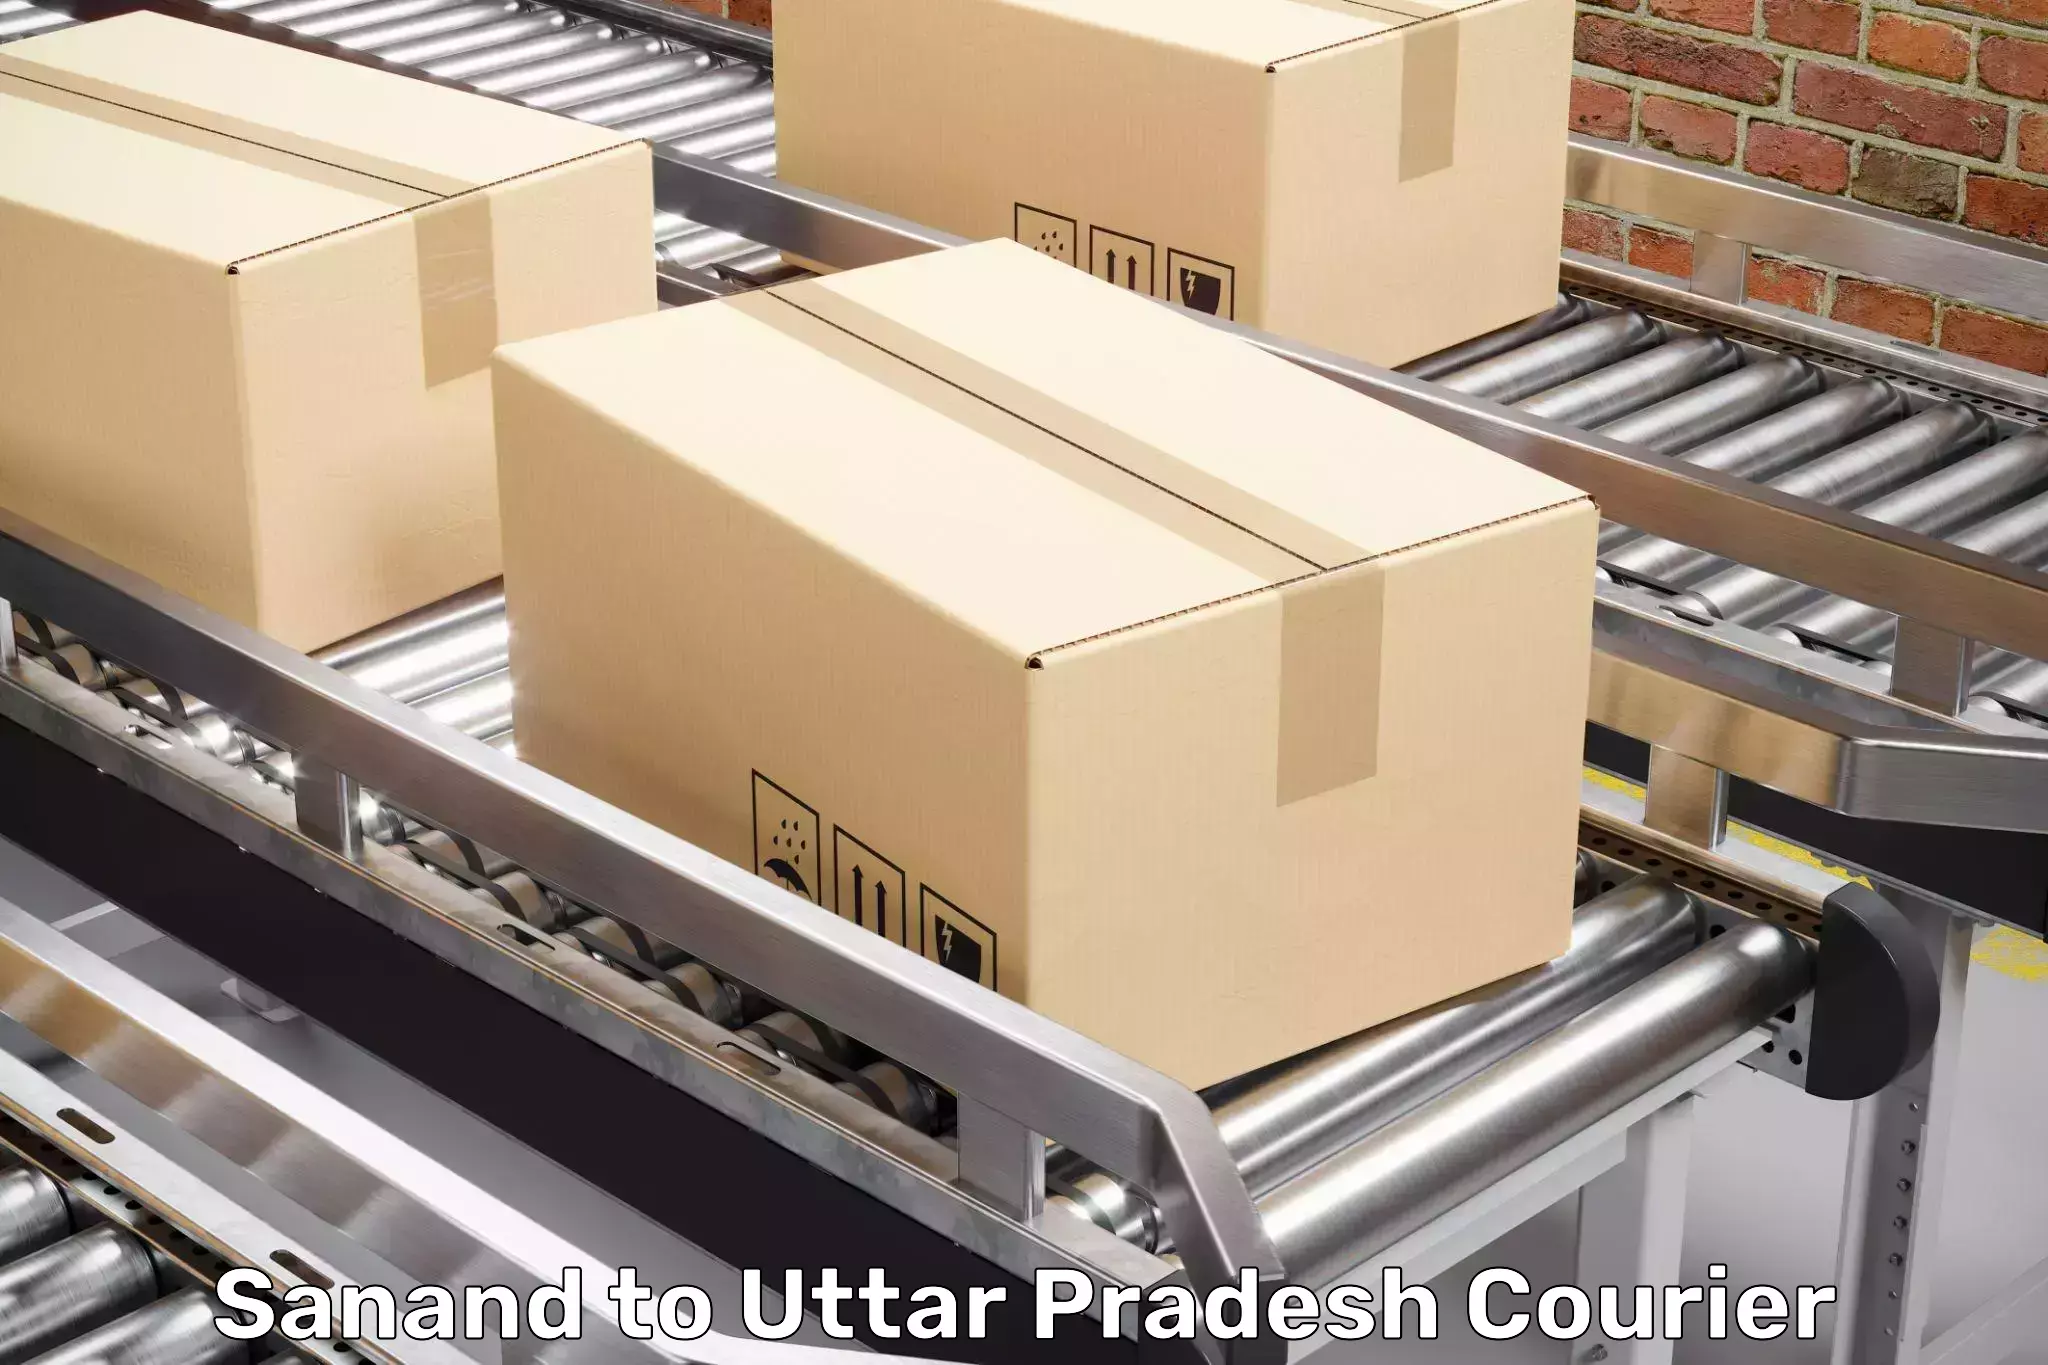 Moving and packing experts Sanand to Sahatwar